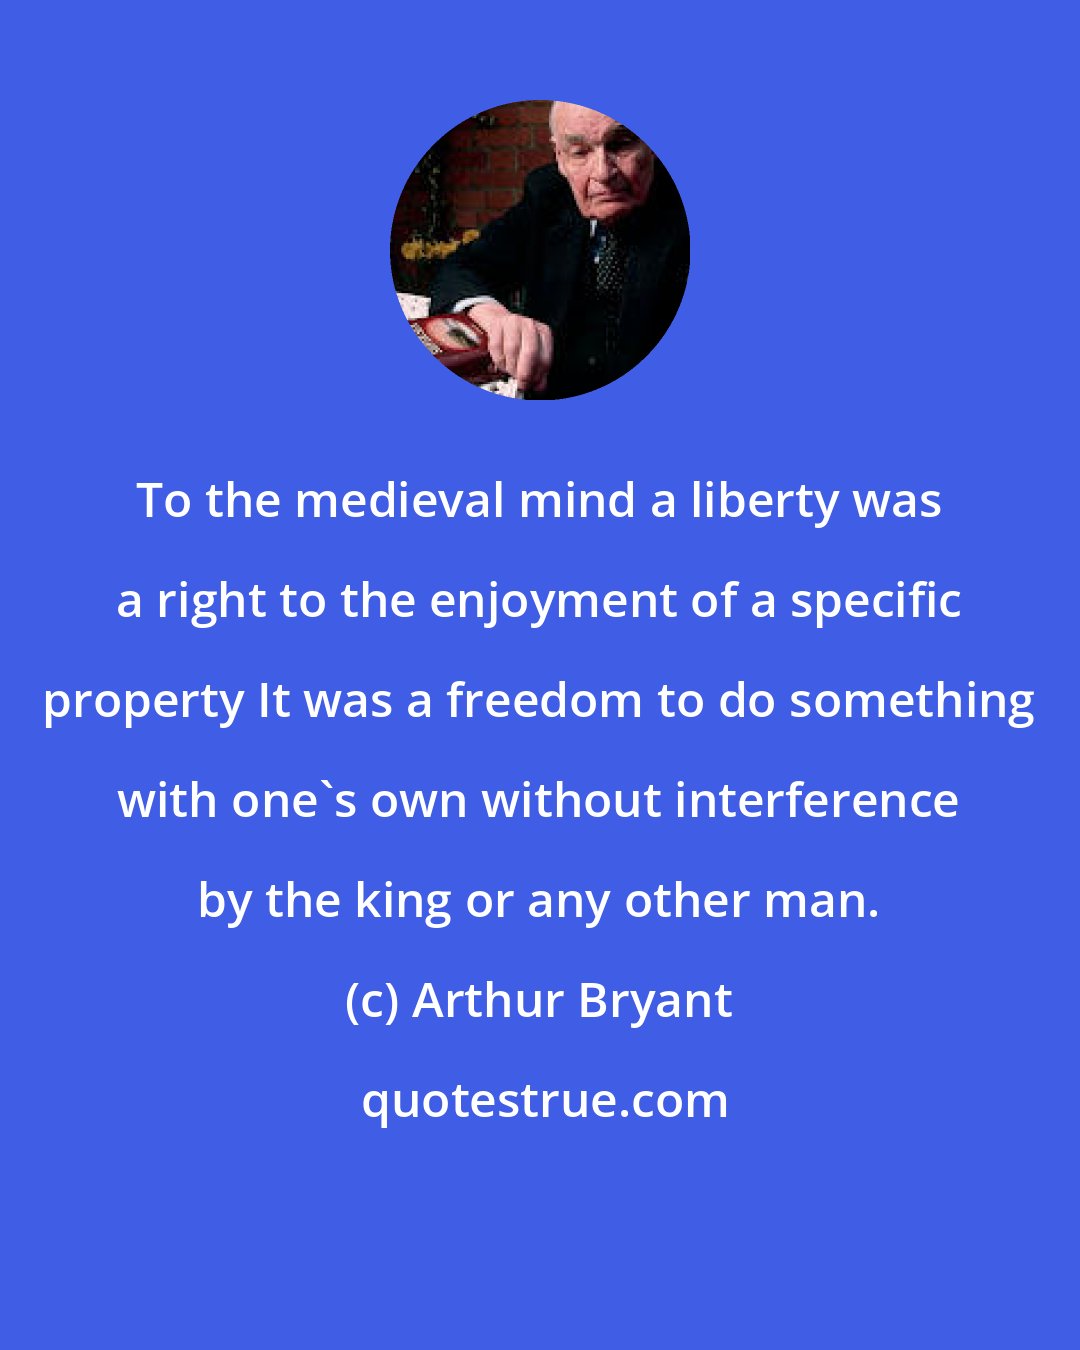 Arthur Bryant: To the medieval mind a liberty was a right to the enjoyment of a specific property It was a freedom to do something with one's own without interference by the king or any other man.